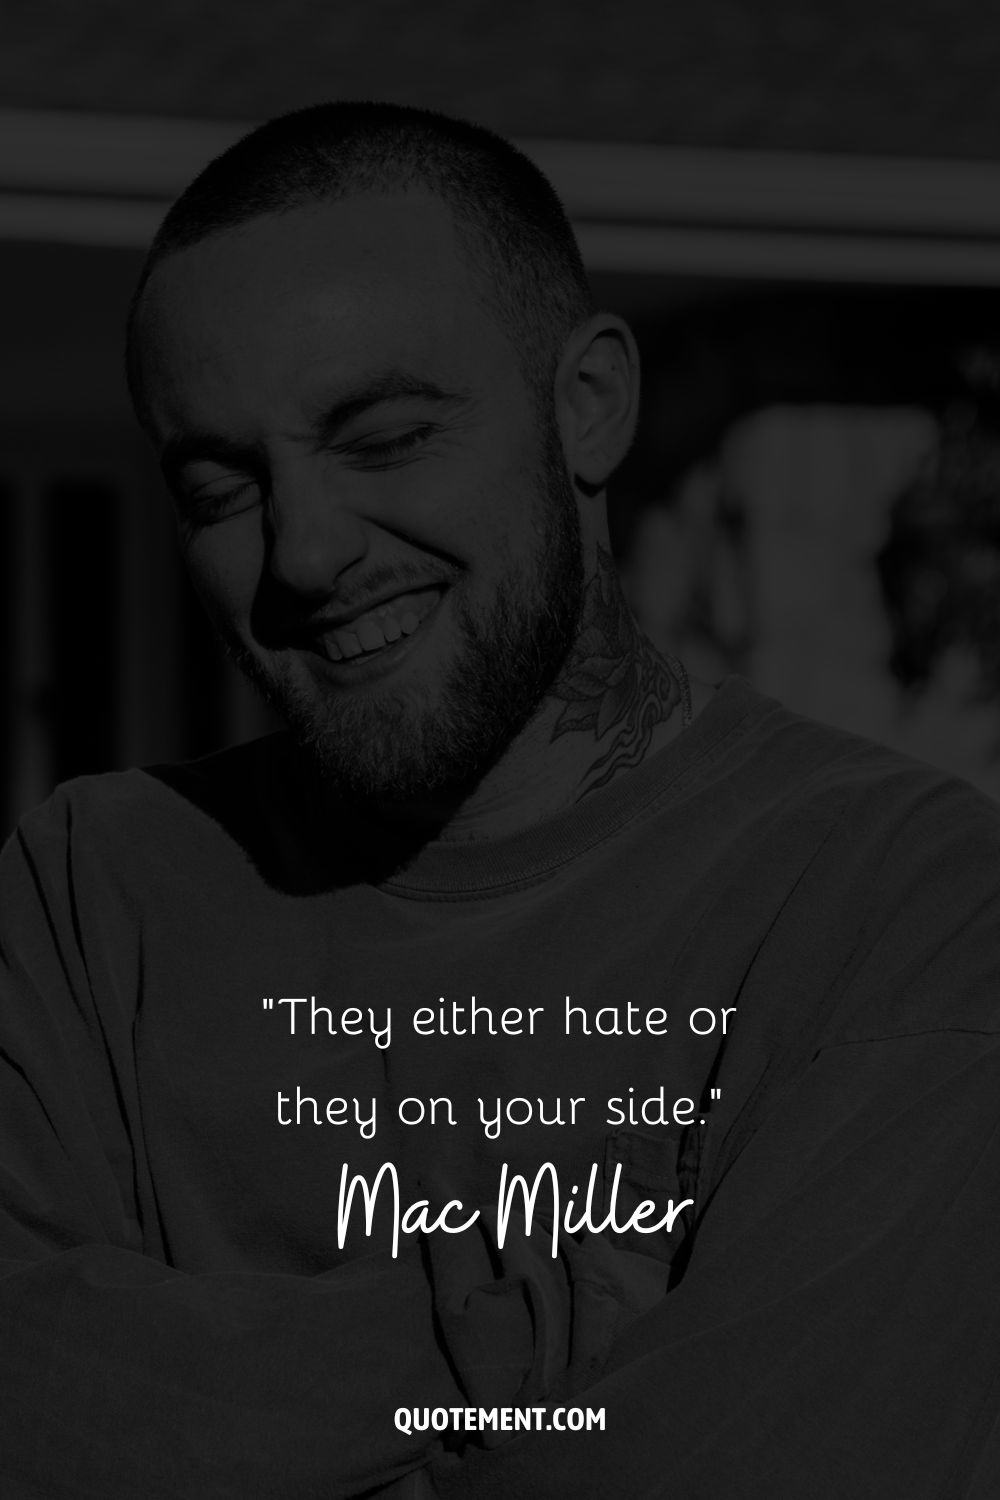 “They either hate or they on your side.” – Mac Miller